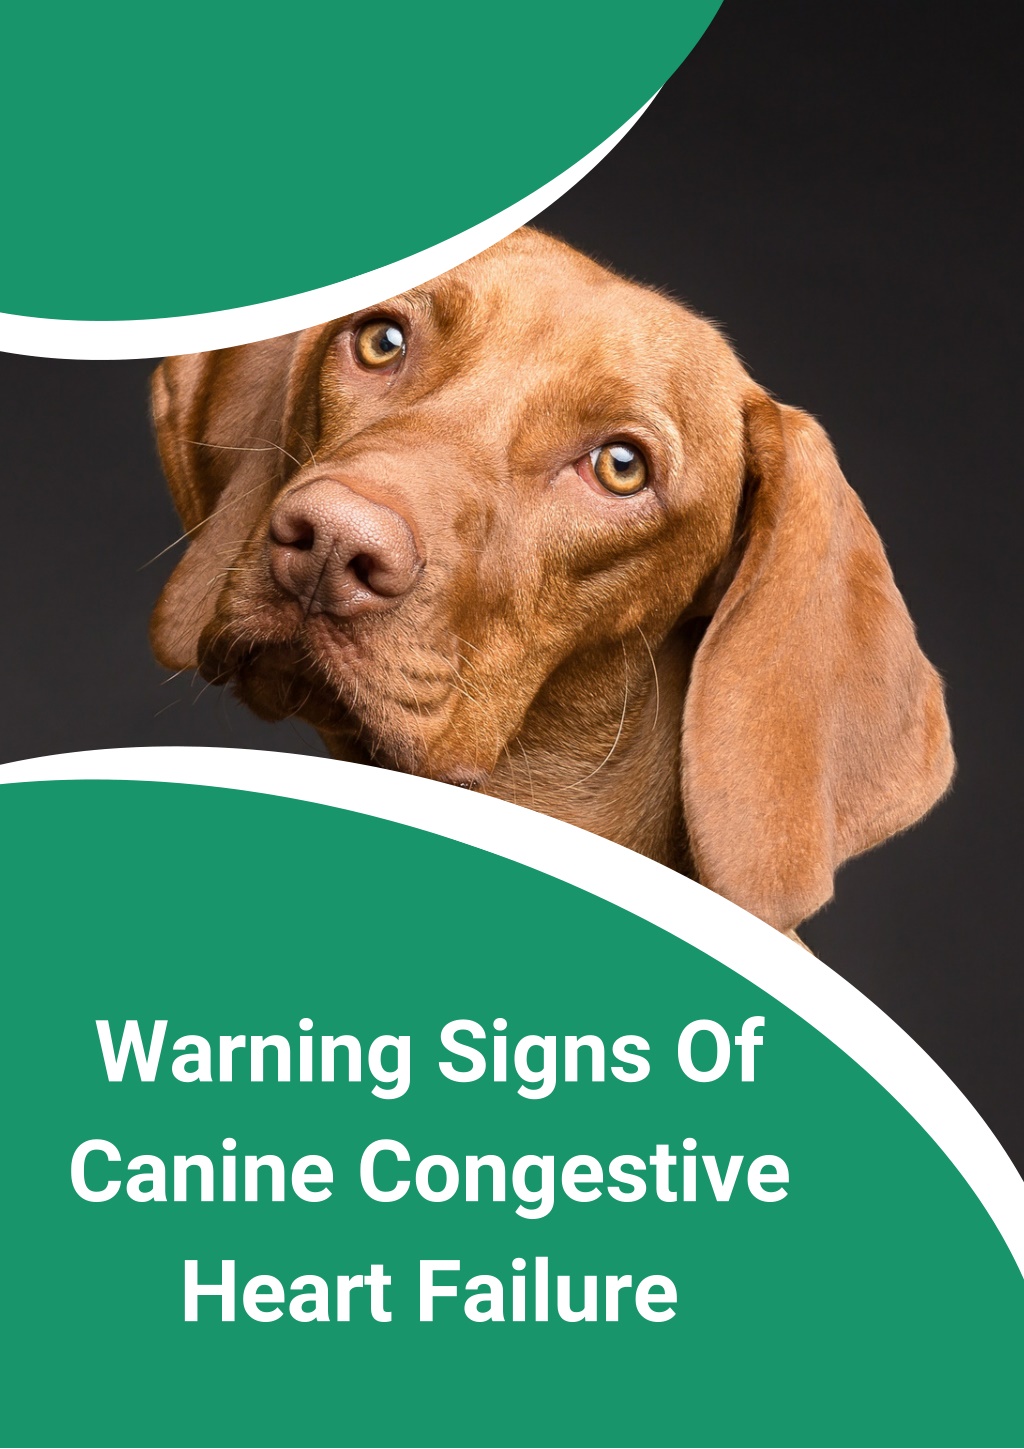 PPT - Warning Signs Of Canine Congestive Heart Failure PowerPoint ...